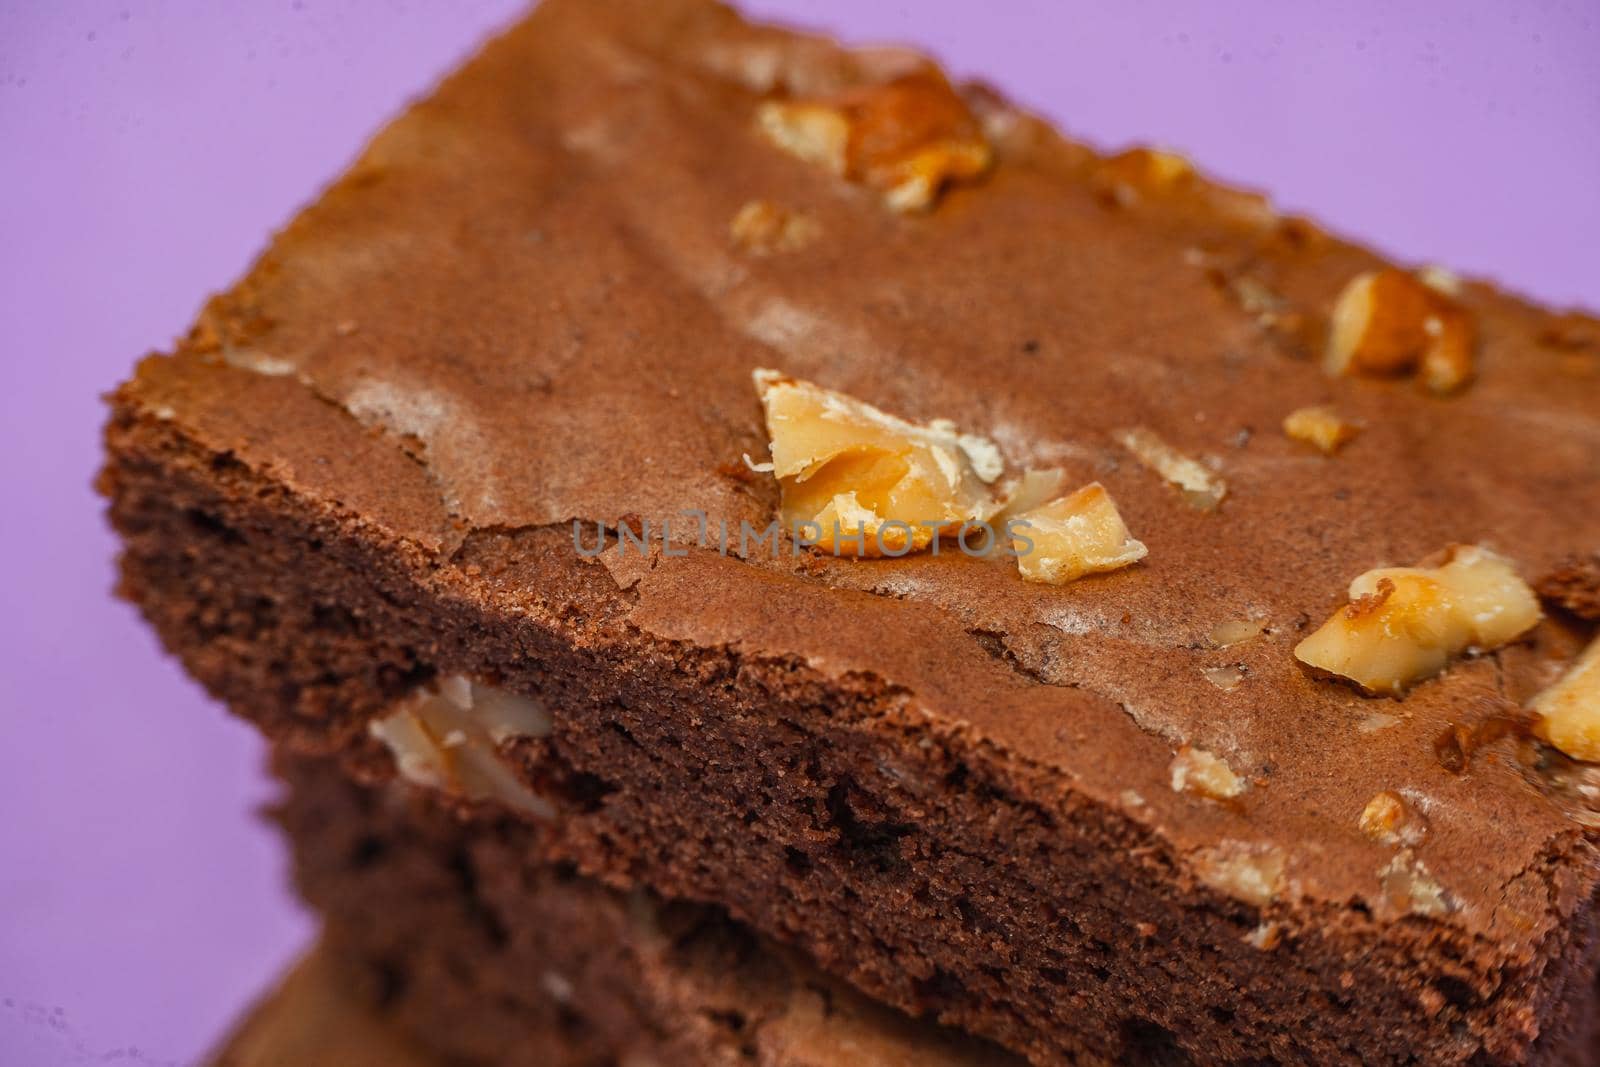 Homemade chocolate brownie squares with pecan pieces. Orange Background. Natural, healthy food concept. High view.